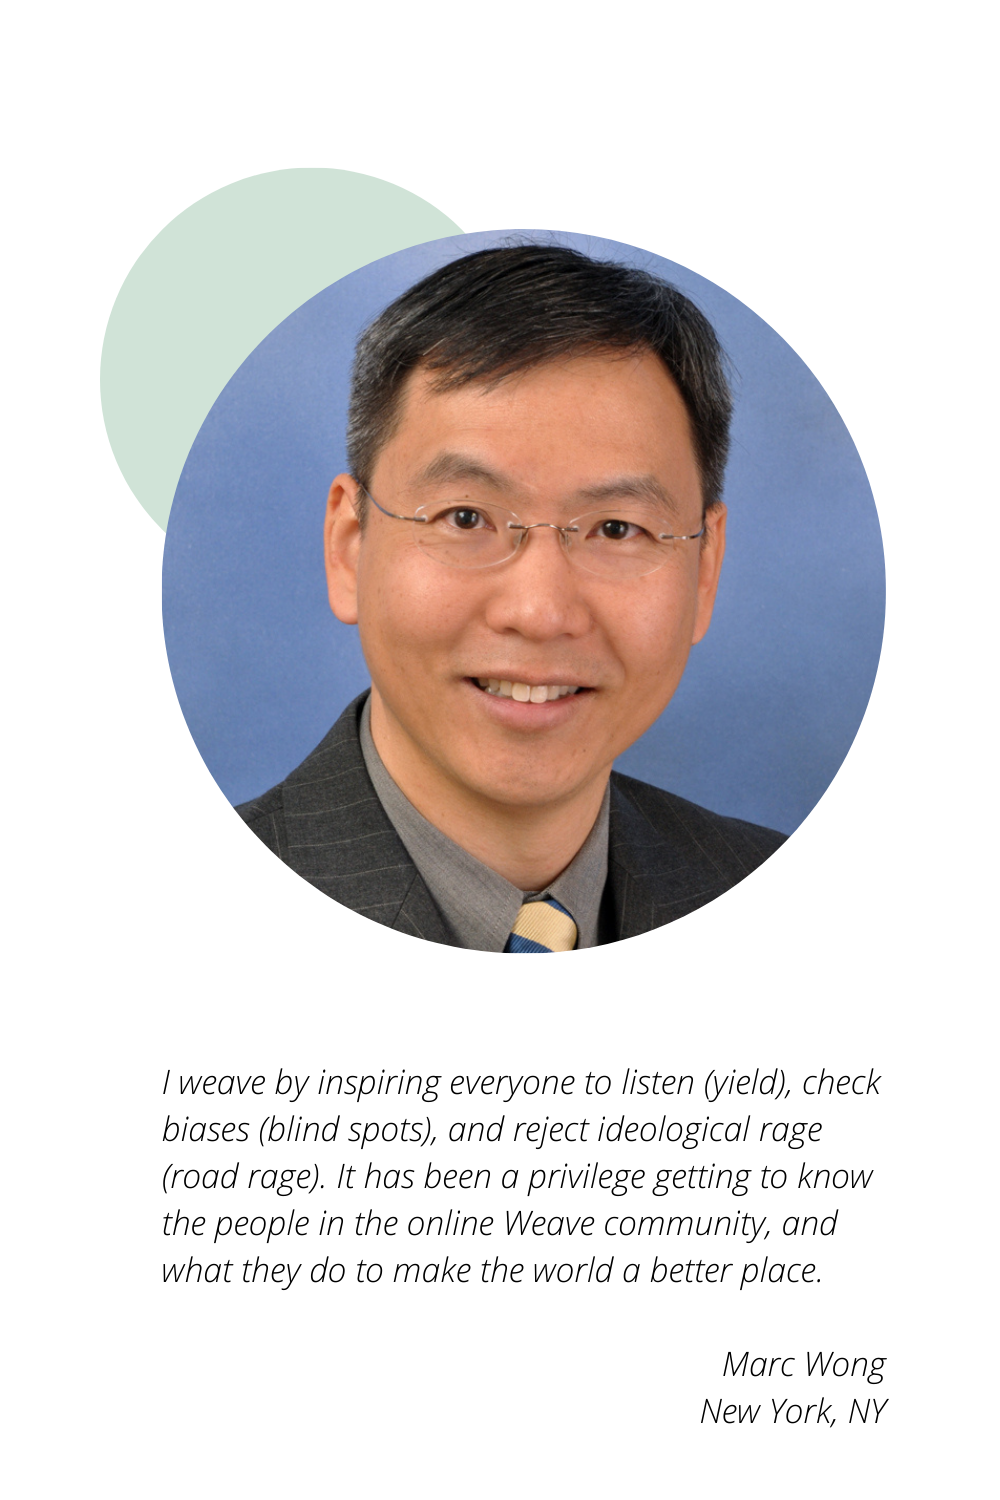 Marc Wong of New York, NY: I weave by inspiring everyone to listen (yield), check biases (blind spots), and reject ideological rage (road rage). It has been a privilege getting to know the people in the online Weave community, and what they do to make the world a better place.